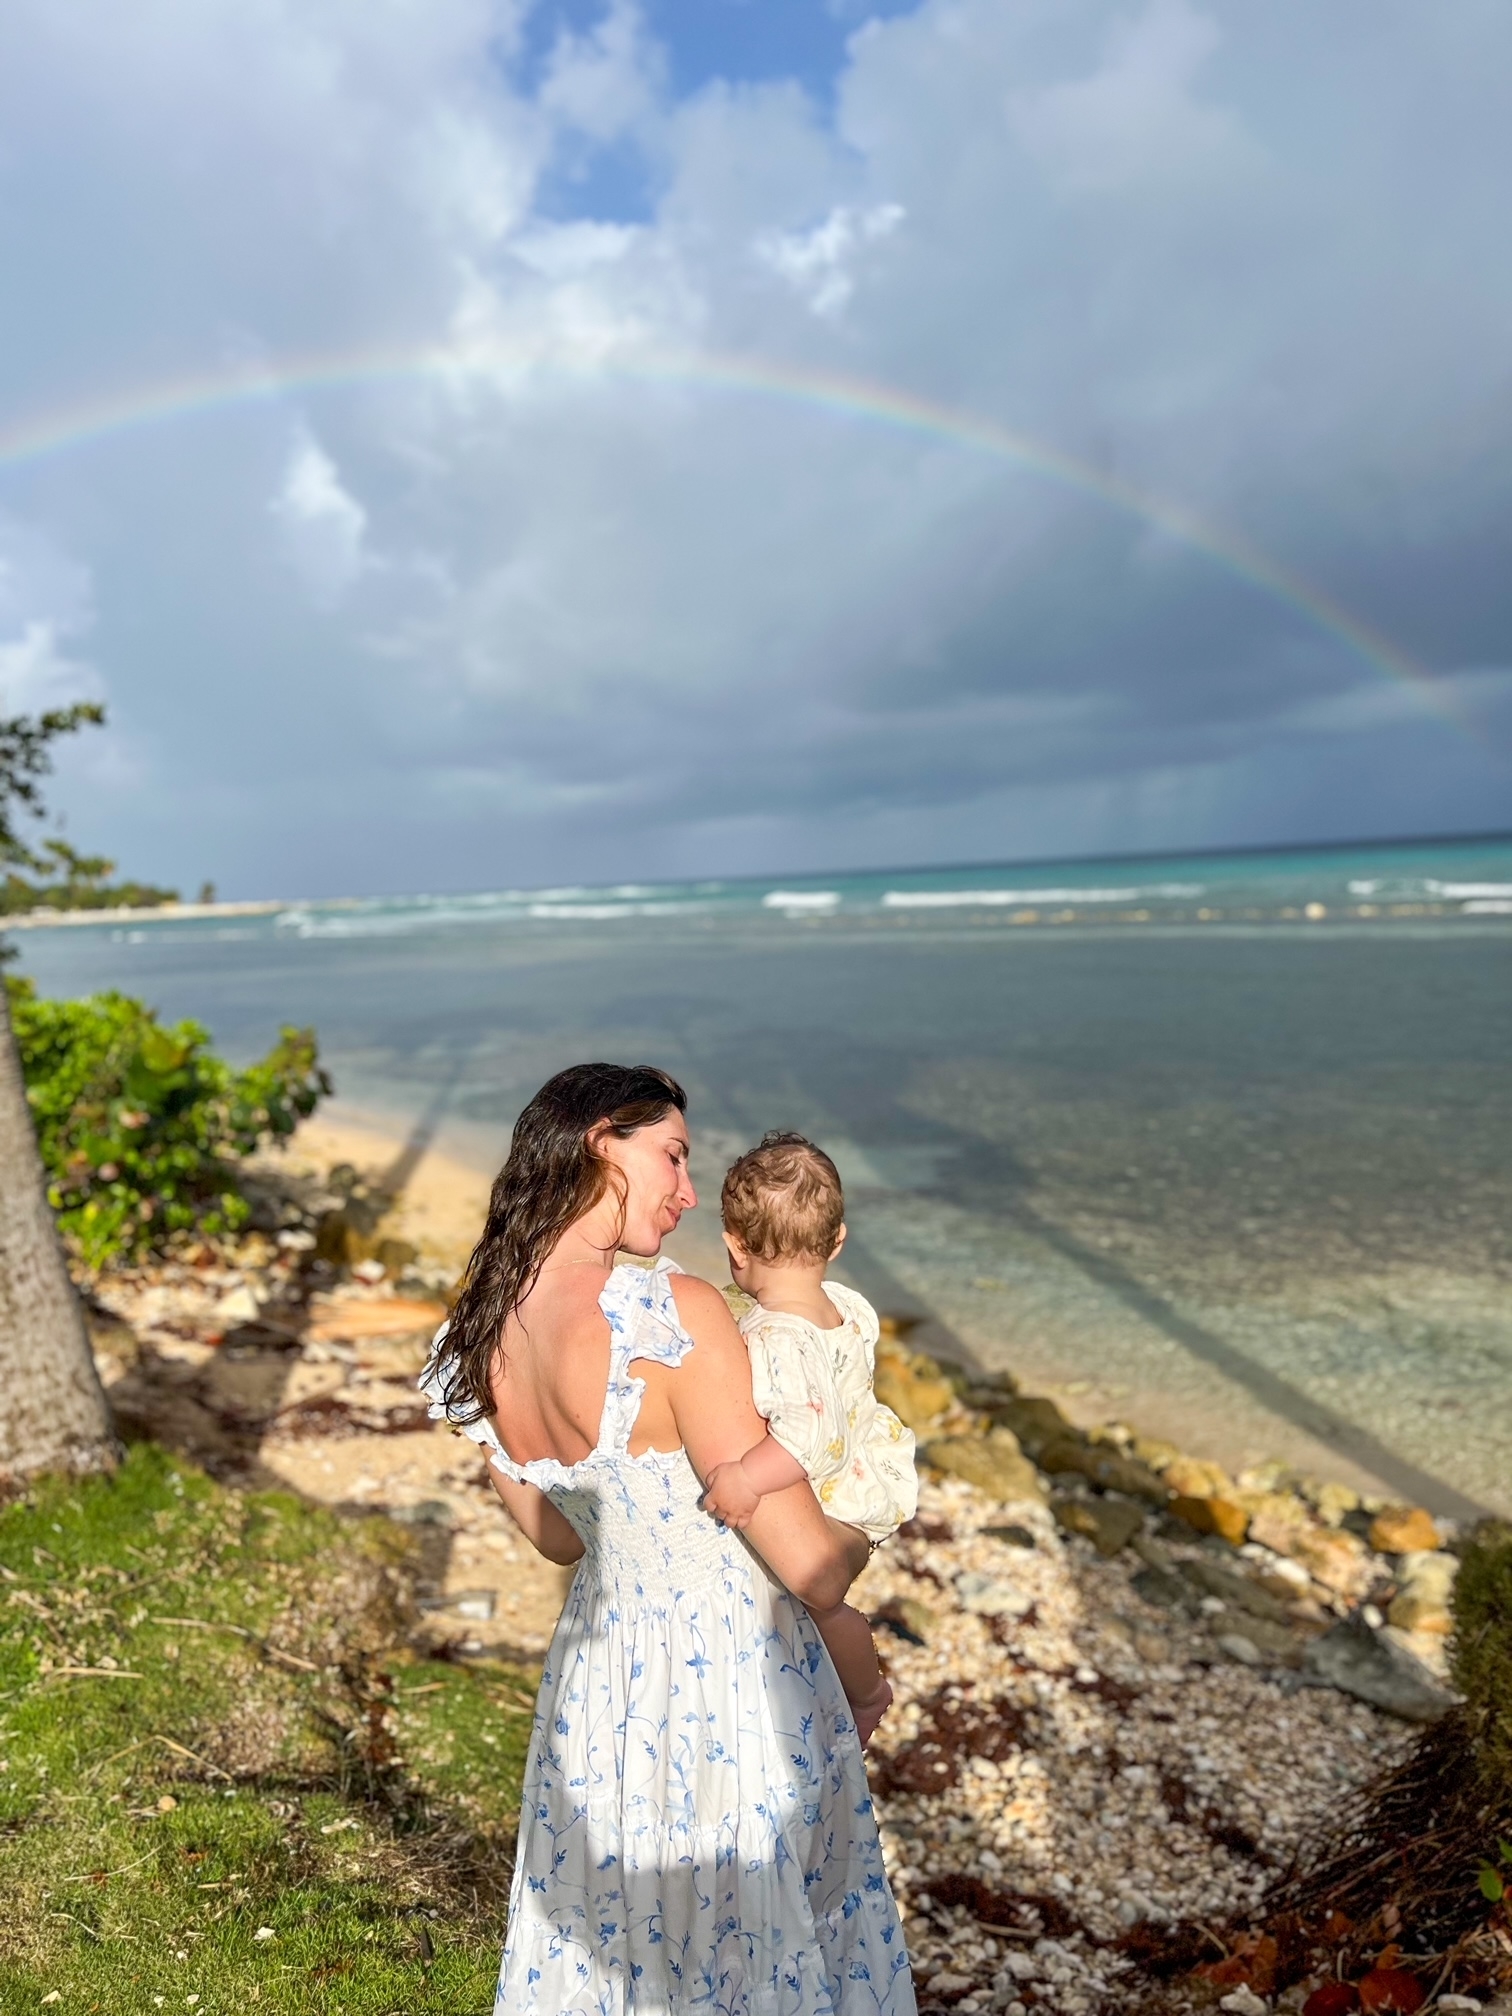 Woman holding a child, both looking at a rainbow over a beach landscape